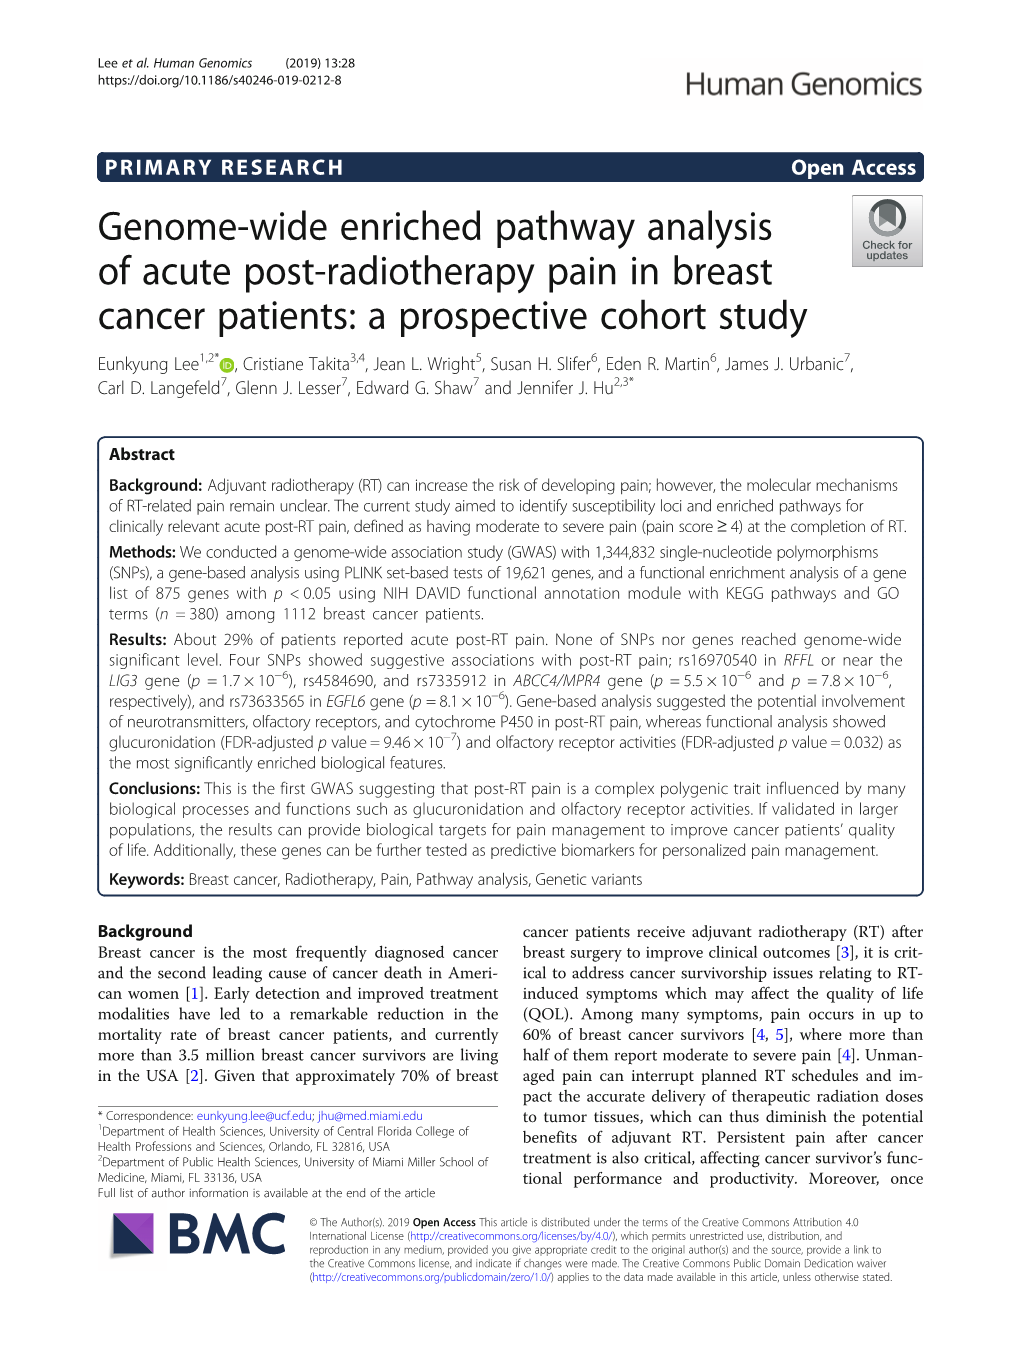 Genome-Wide Enriched Pathway Analysis of Acute Post-Radiotherapy